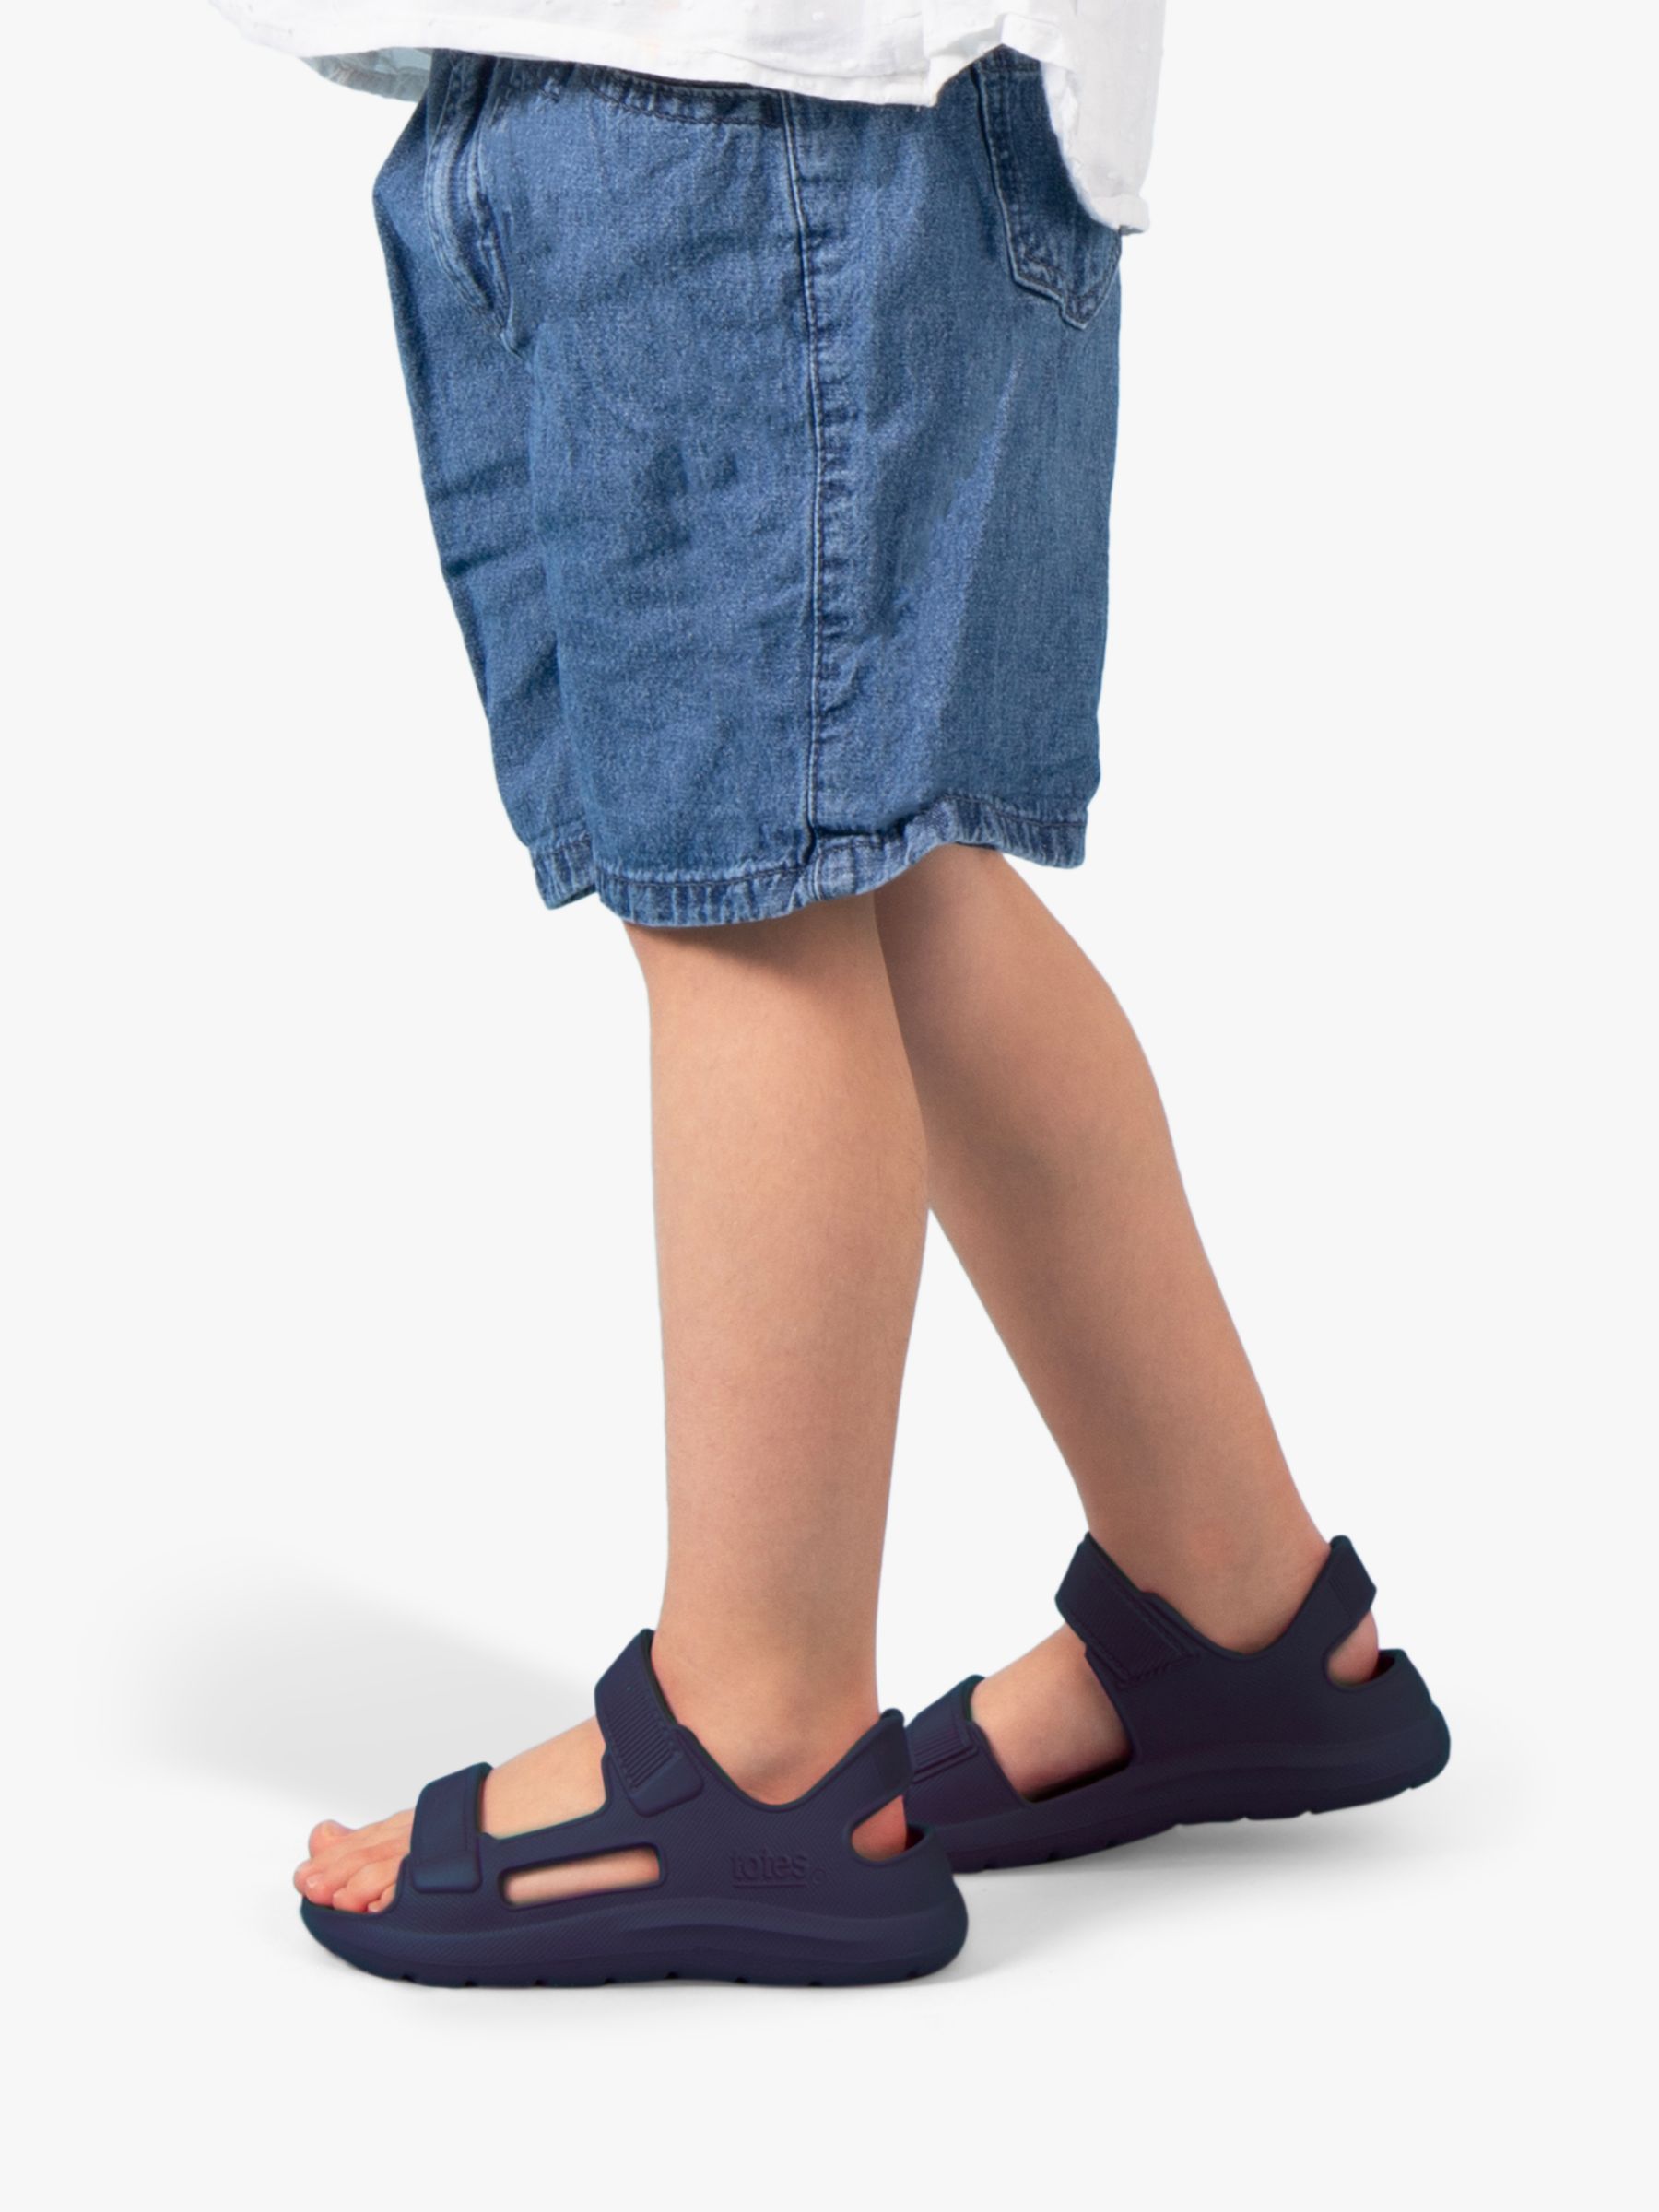 Buy totes Kids' SolBounce Sports Sandals, Navy Online at johnlewis.com